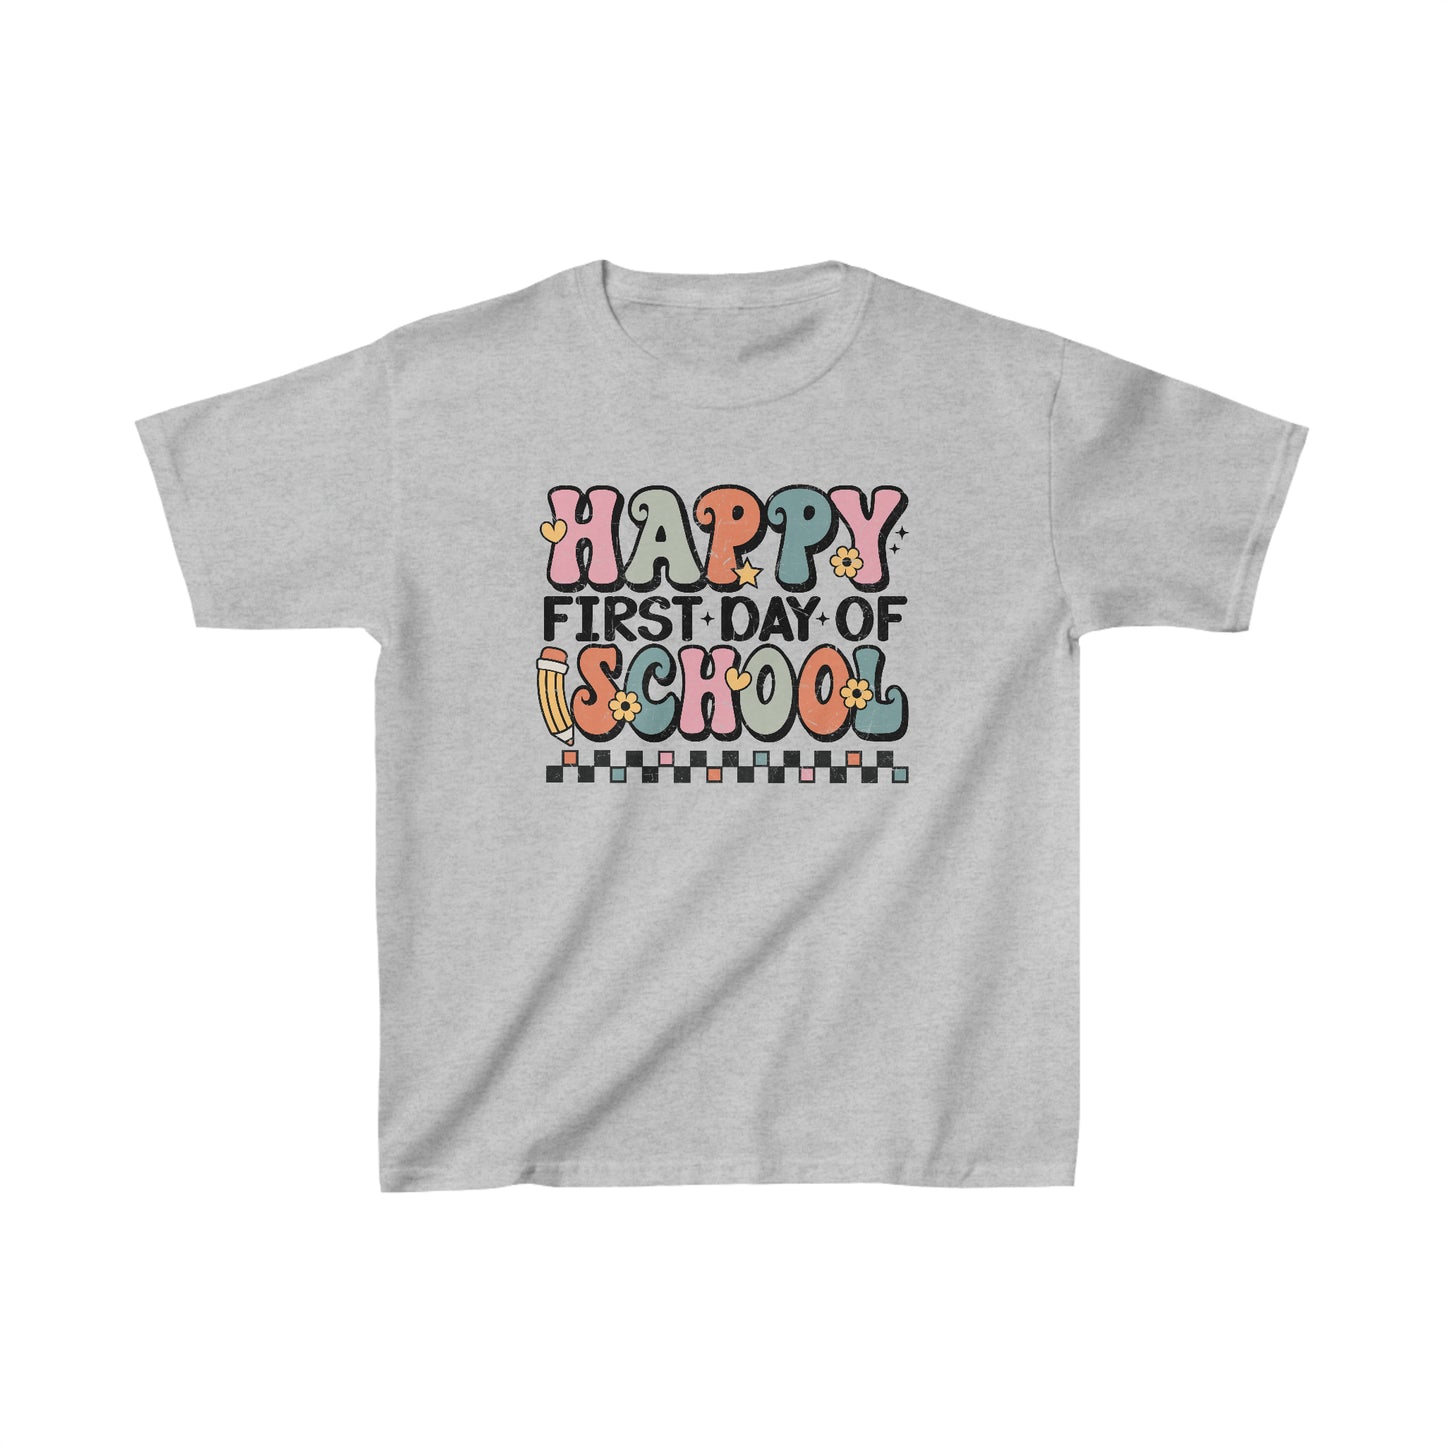 Happy First Day Of School Kids Tee